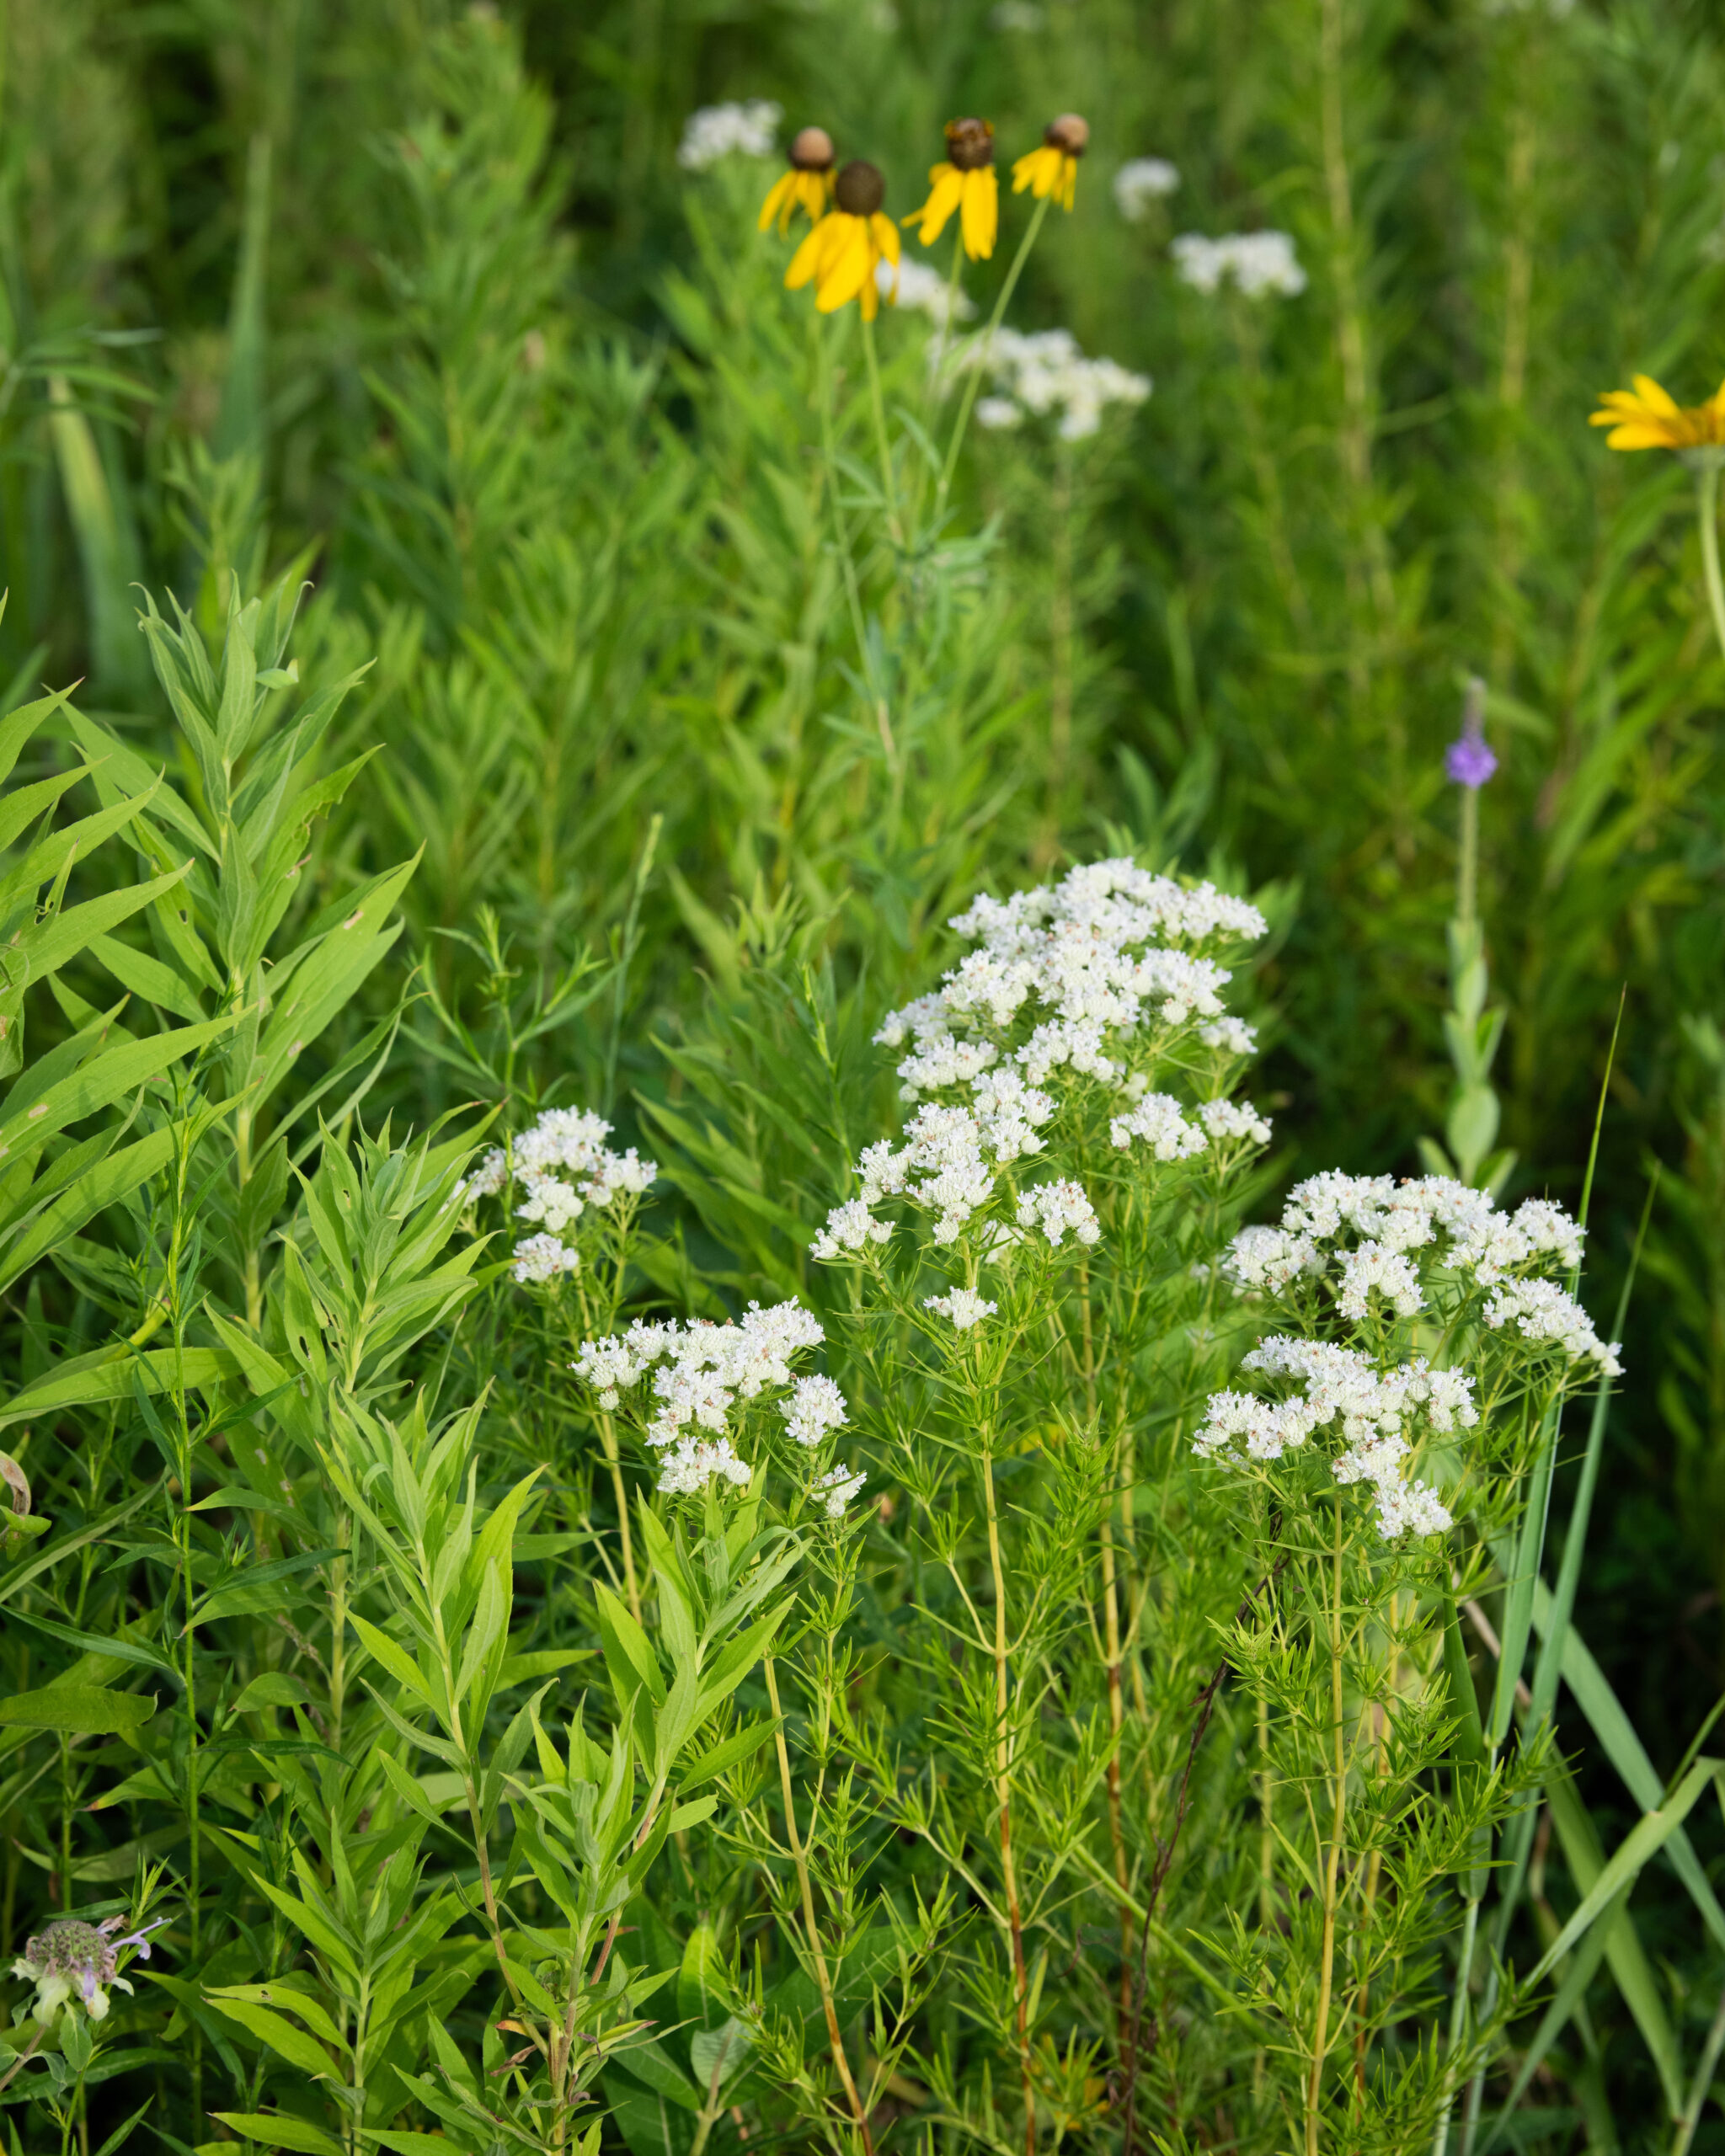 Tall plants with scattered white, yellow and purple blooms.